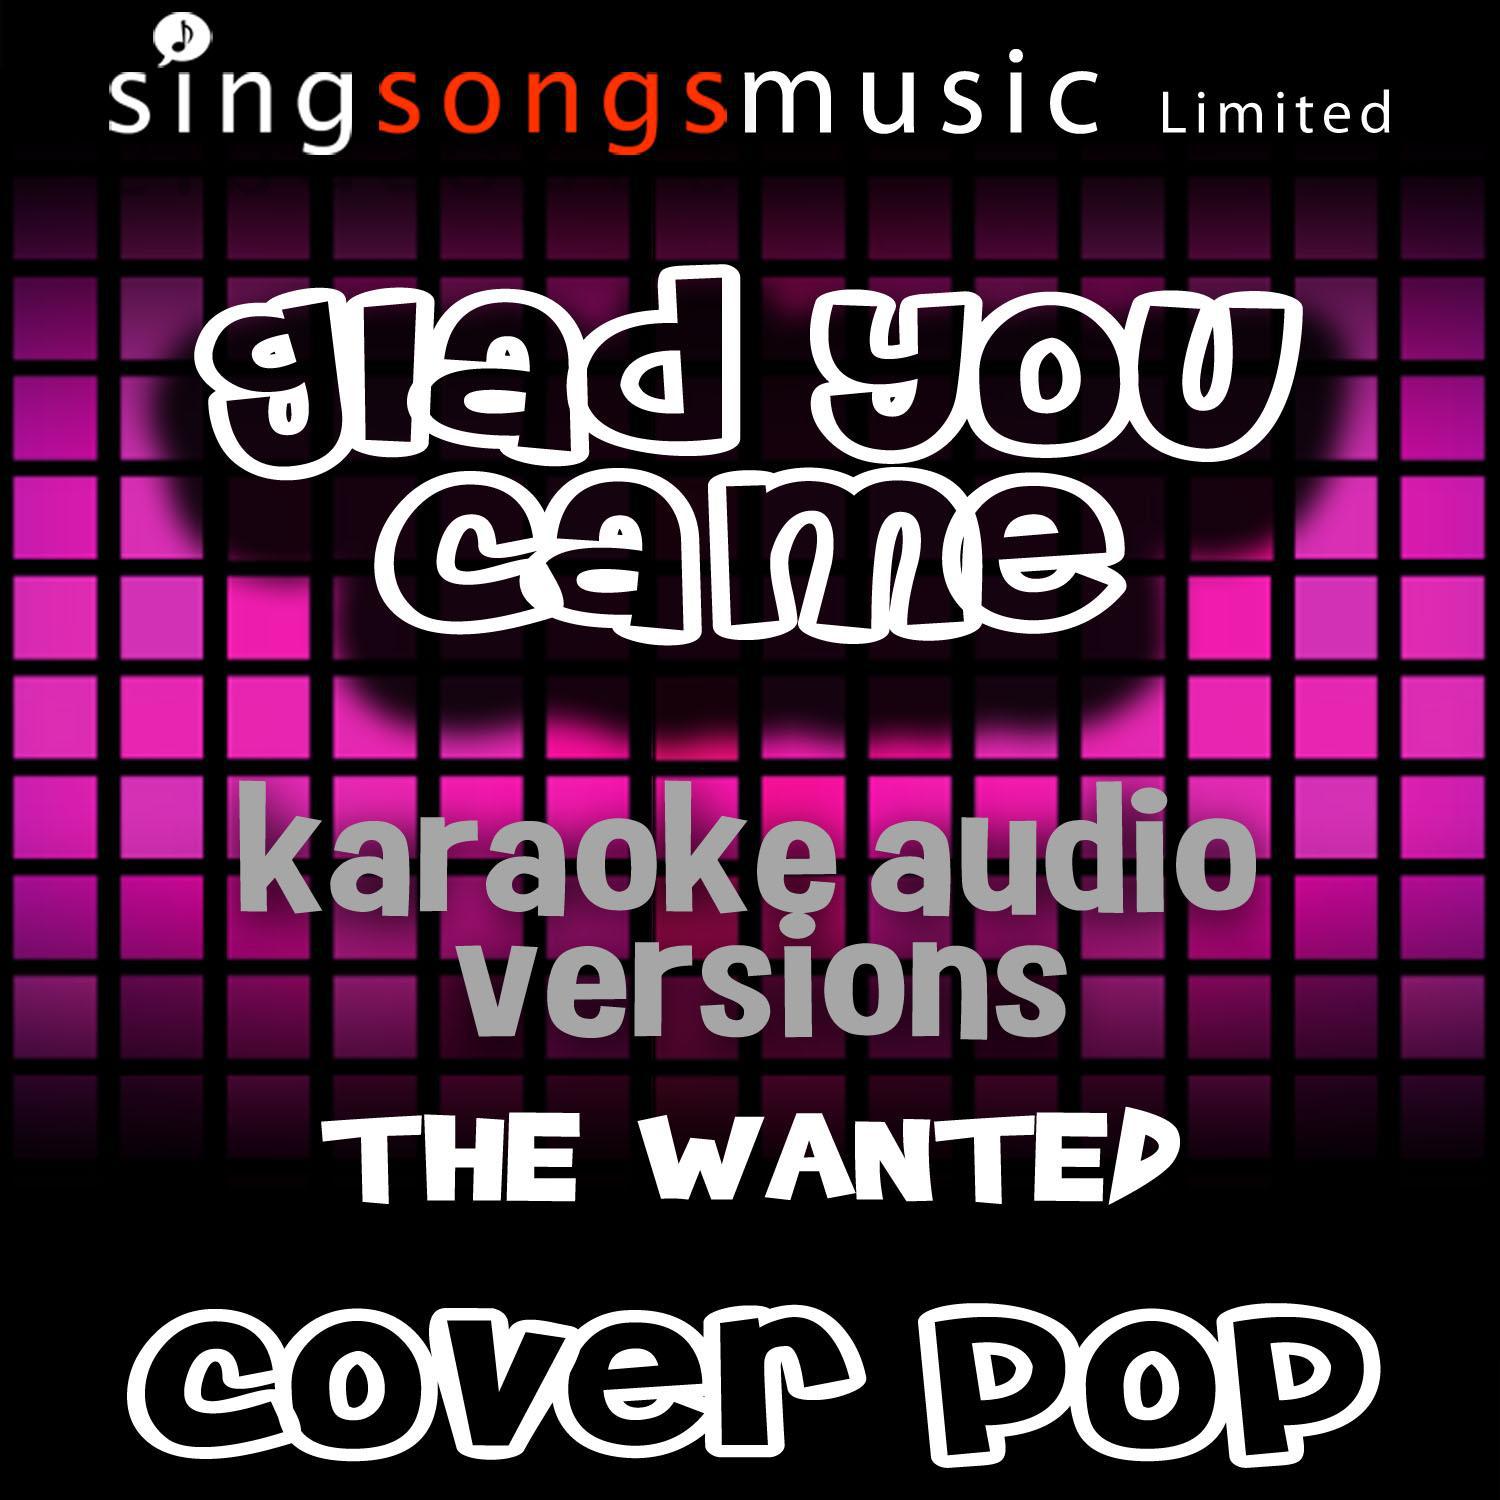 Glad You Came (Originally Performed By The Wanted) [Karaoke Audio Versions]